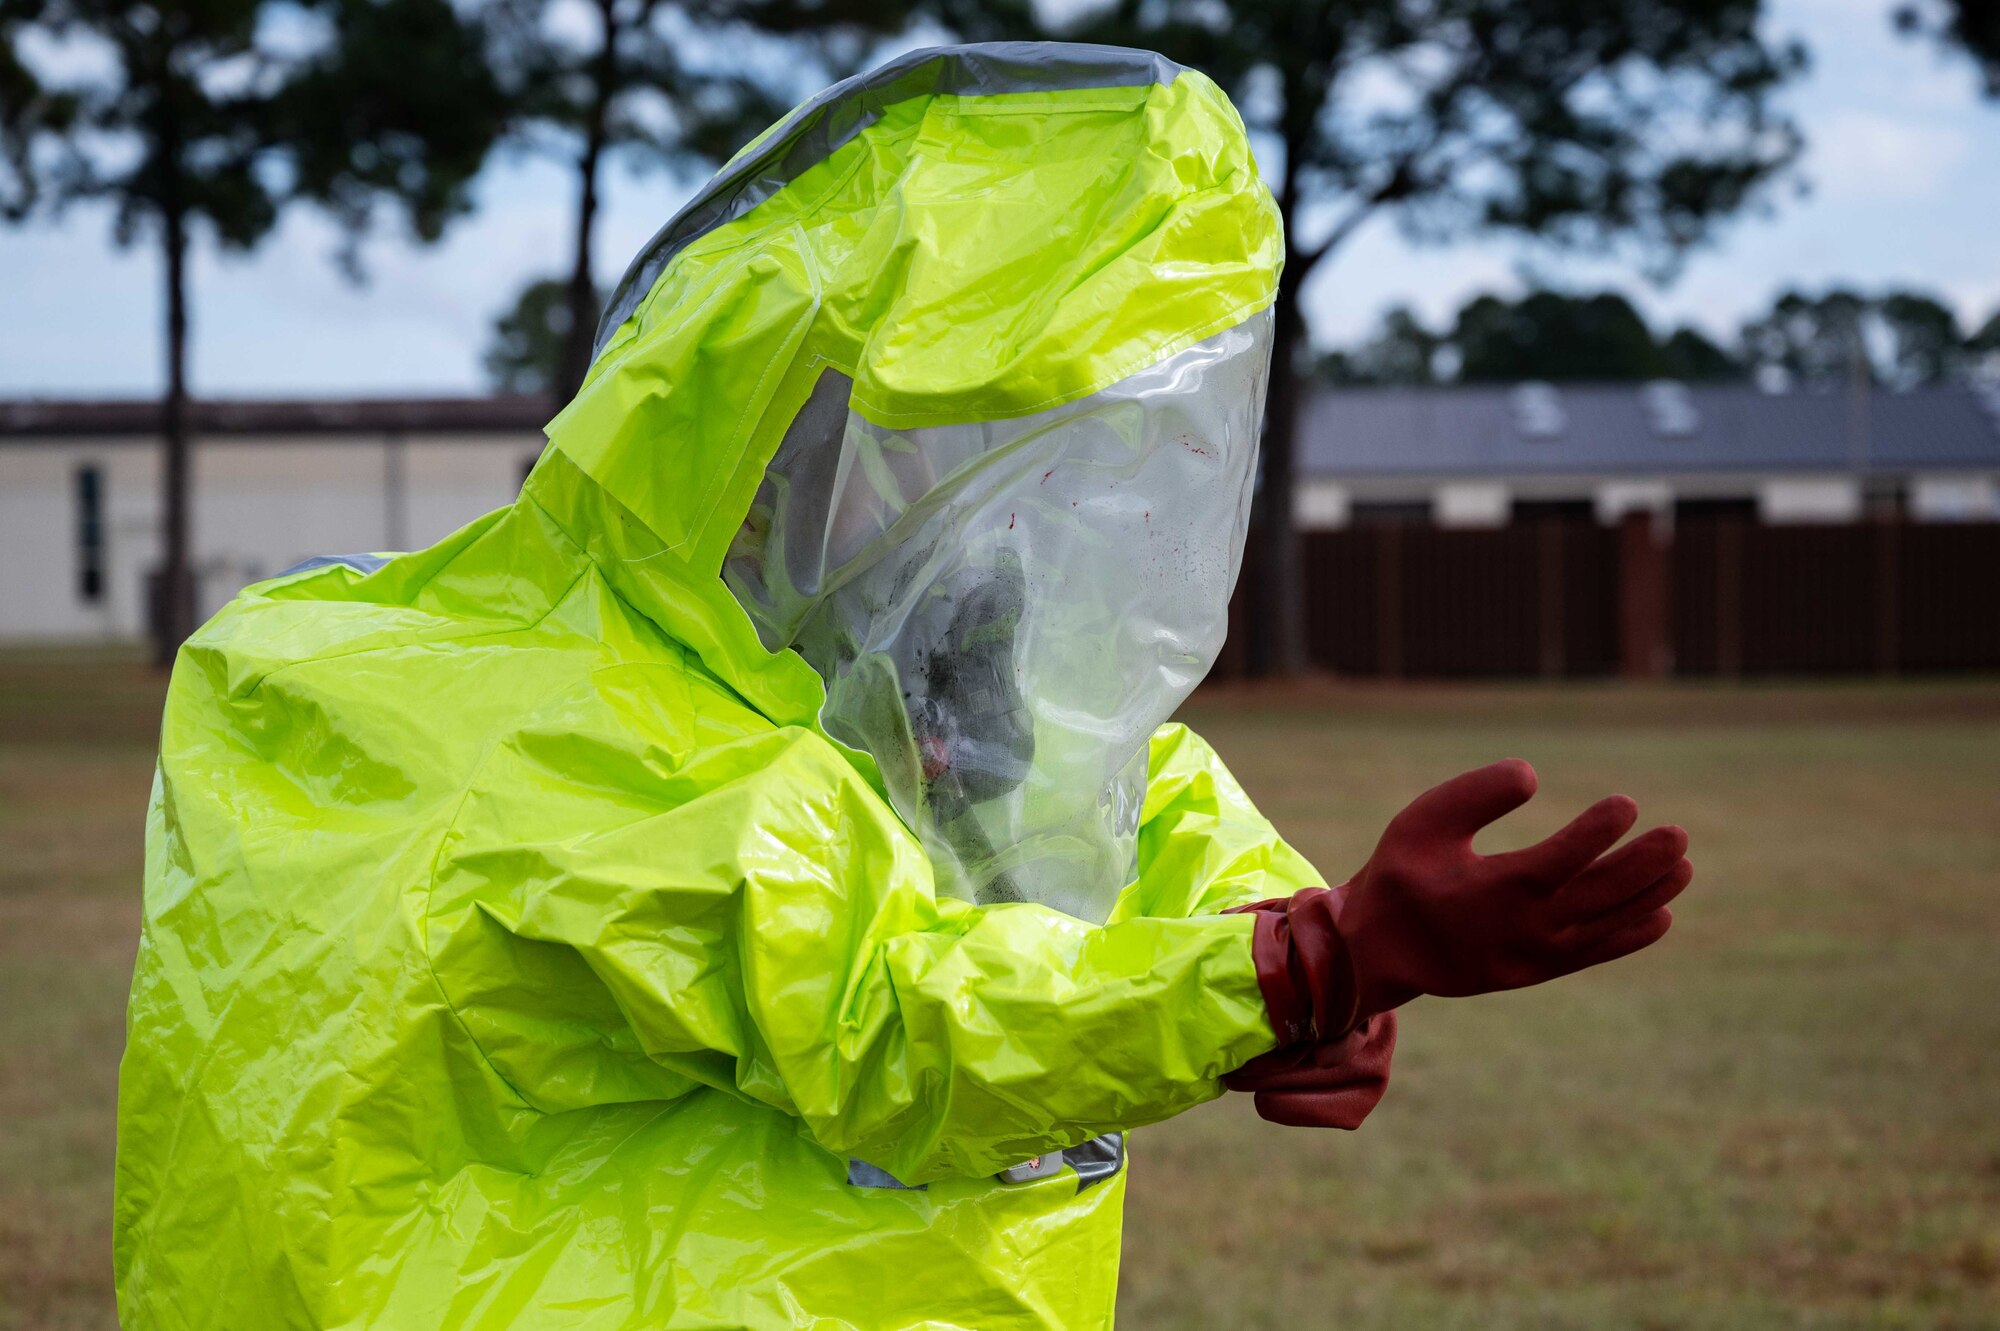 An Airman assigned to the 4th Medical Group practices decontamination procedures as a part of Operation Ready Eagle at Seymour Johnson Air Force Base, North Carolina, Oct. 29, 2021. Operation Ready Eagle focused on decontamination procedures, triage training, and point of dispense training. (U.S. Air Force Photo by Senior Airman David Lynn)